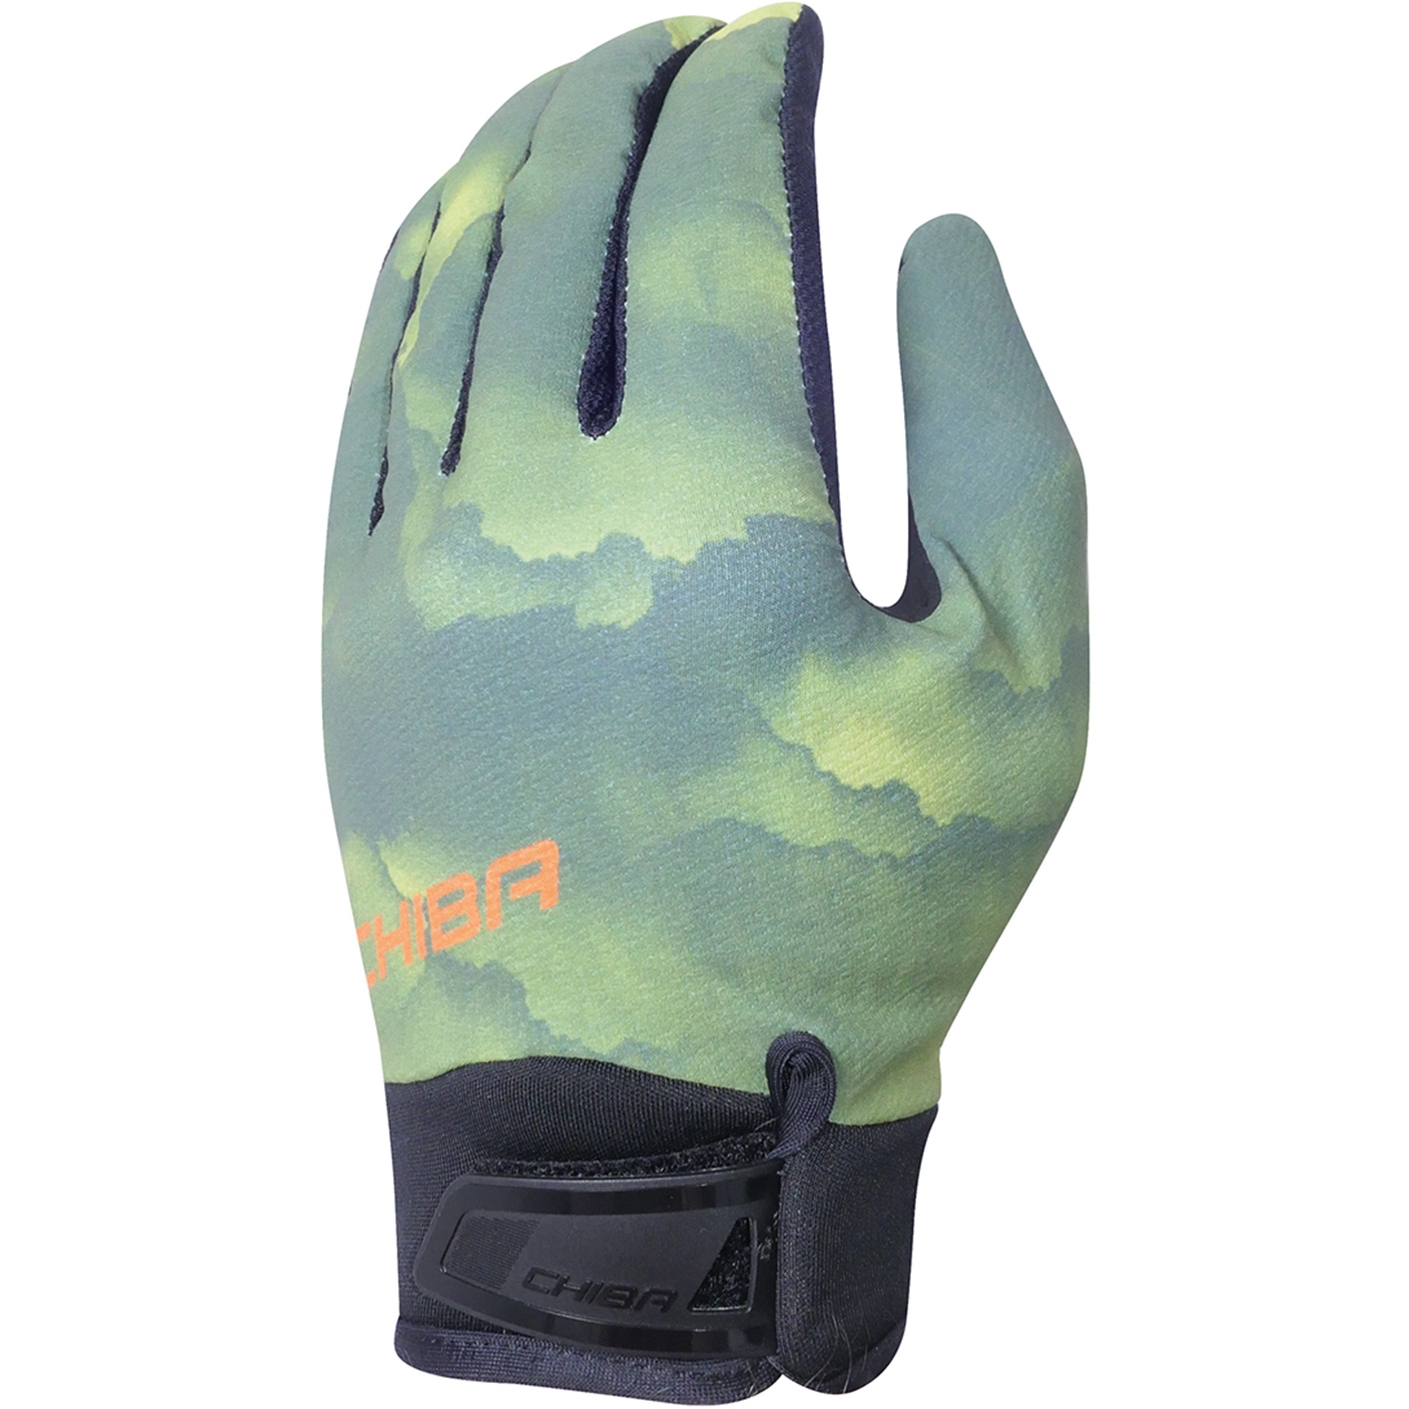 Image of Chiba Viper Cycling Gloves - olive